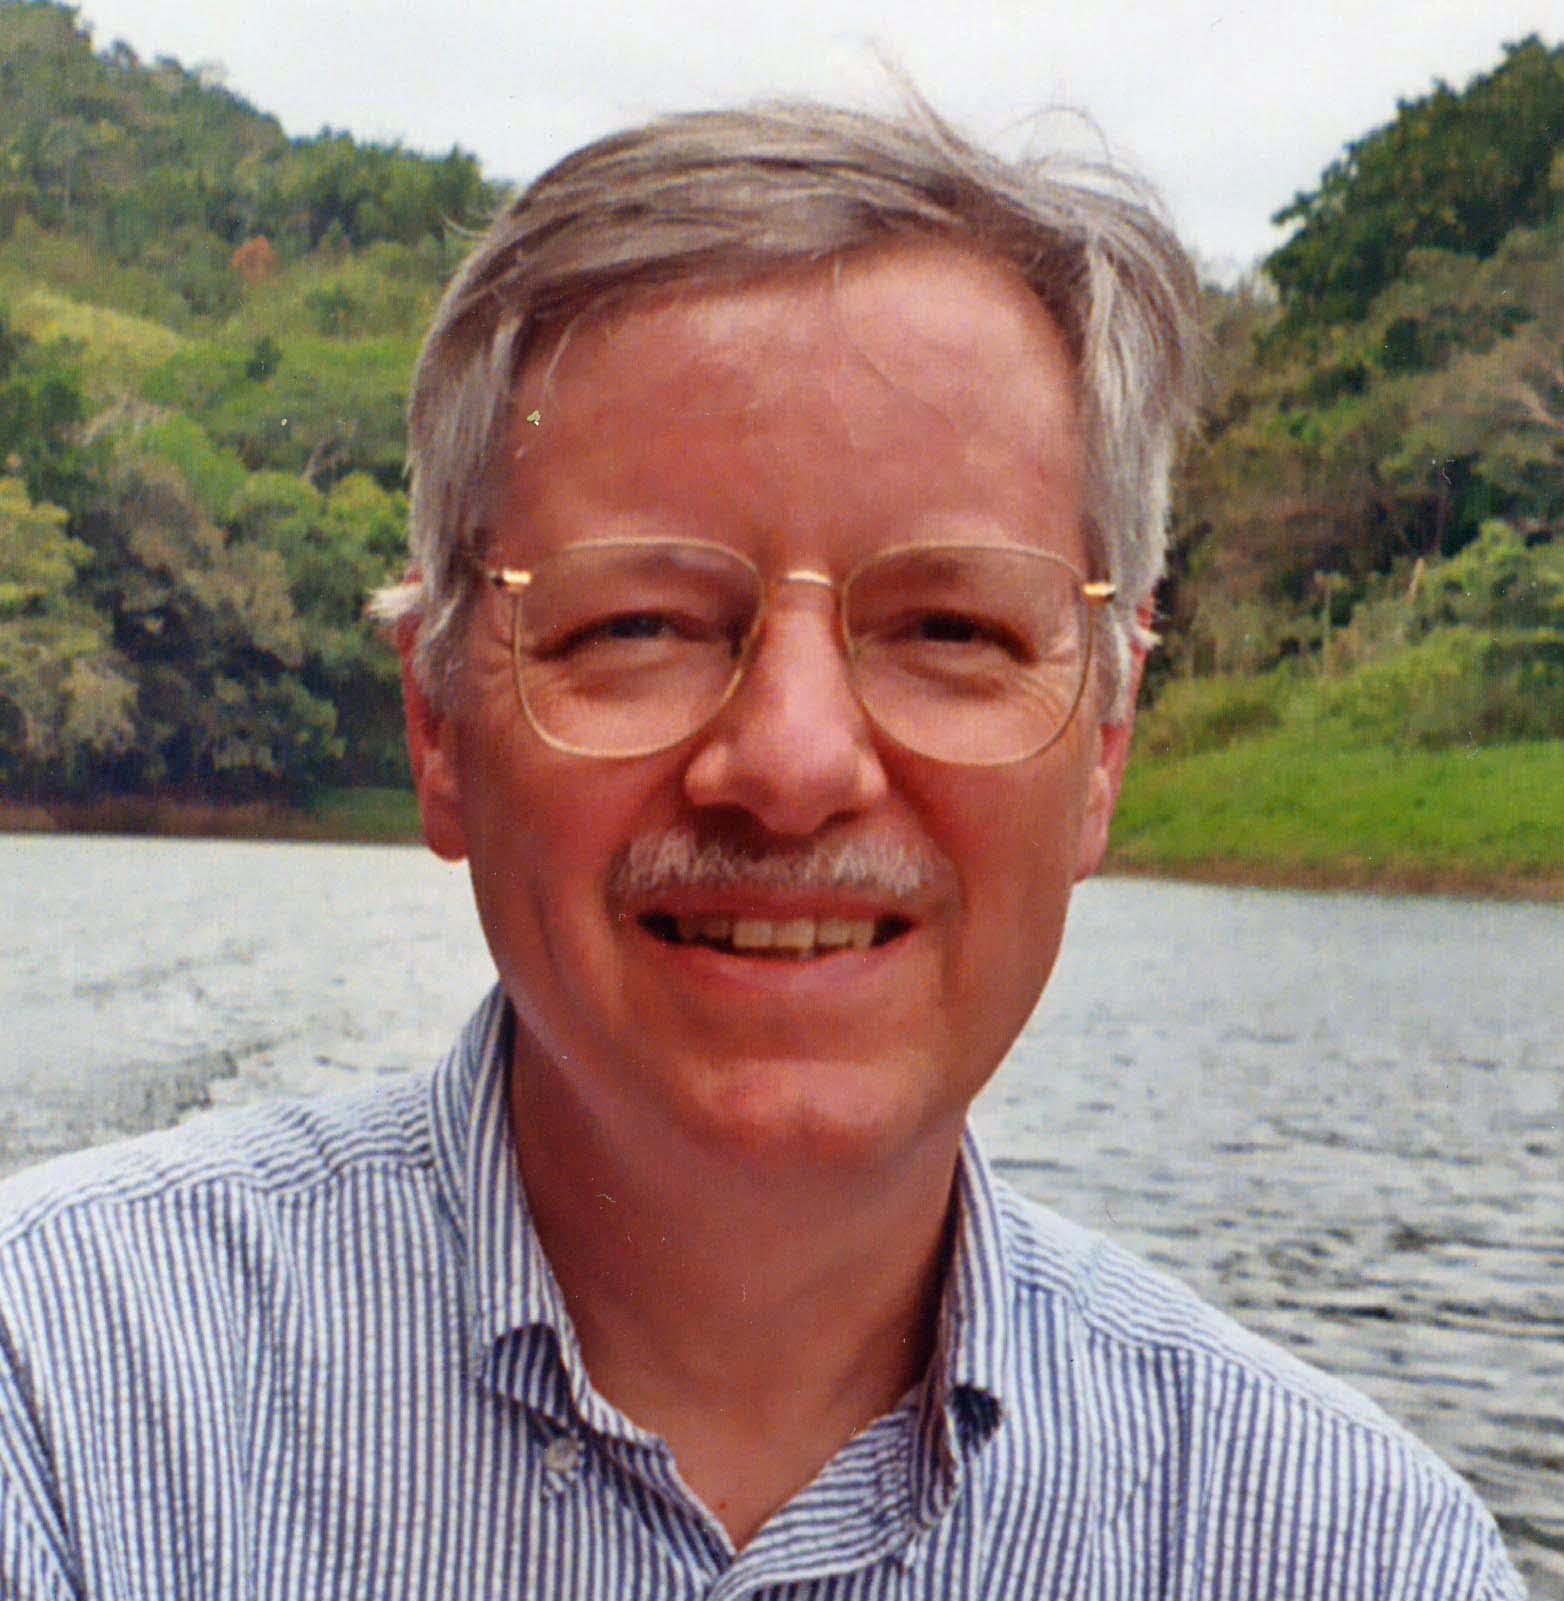 Man with mustache and glasses in front of a river